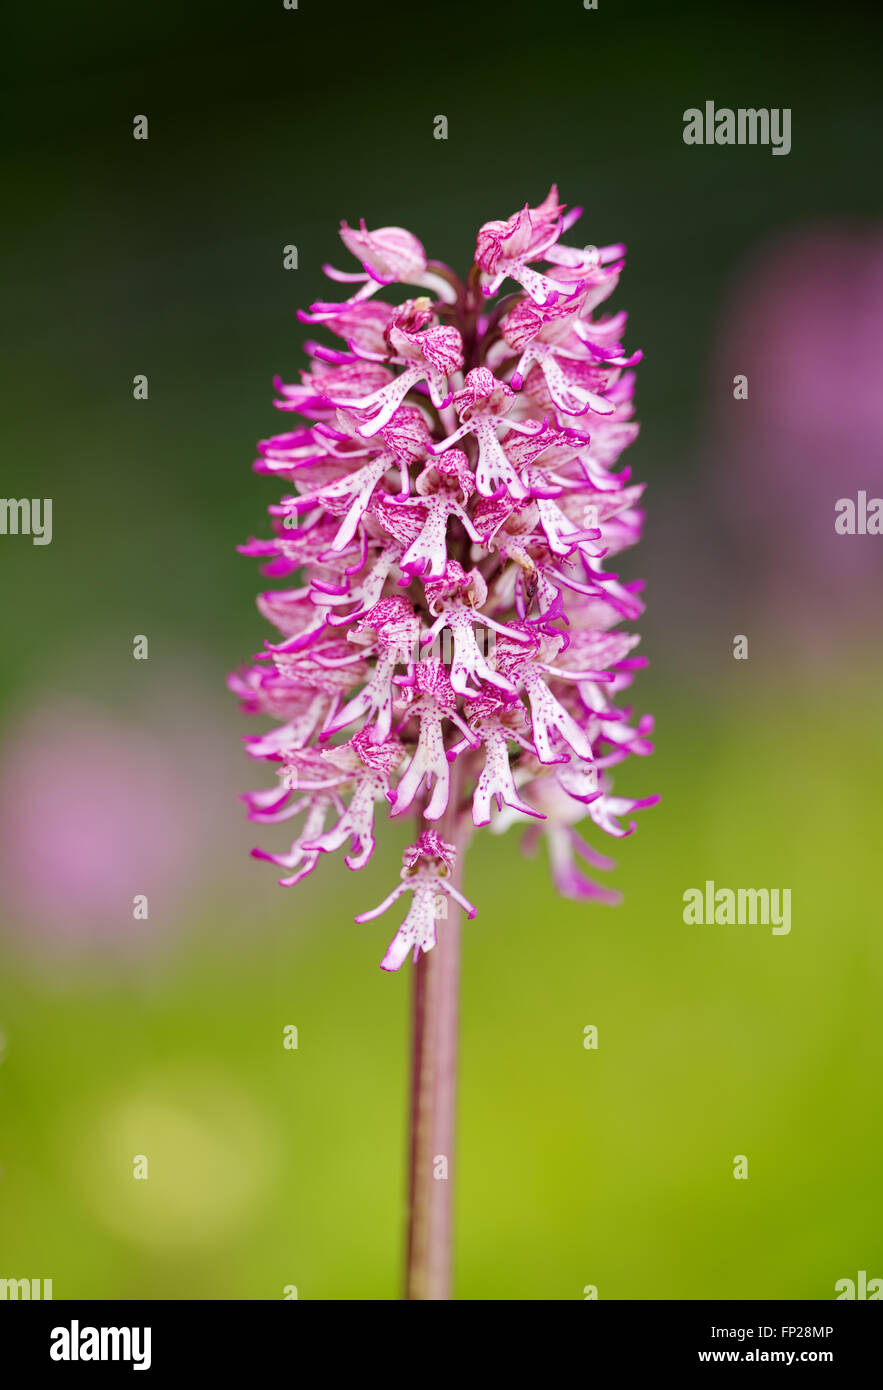 Natural hybrid of lady orchid (Orchis purpurea) and monkey orchid (Orchis simia) with soft focus background Stock Photo